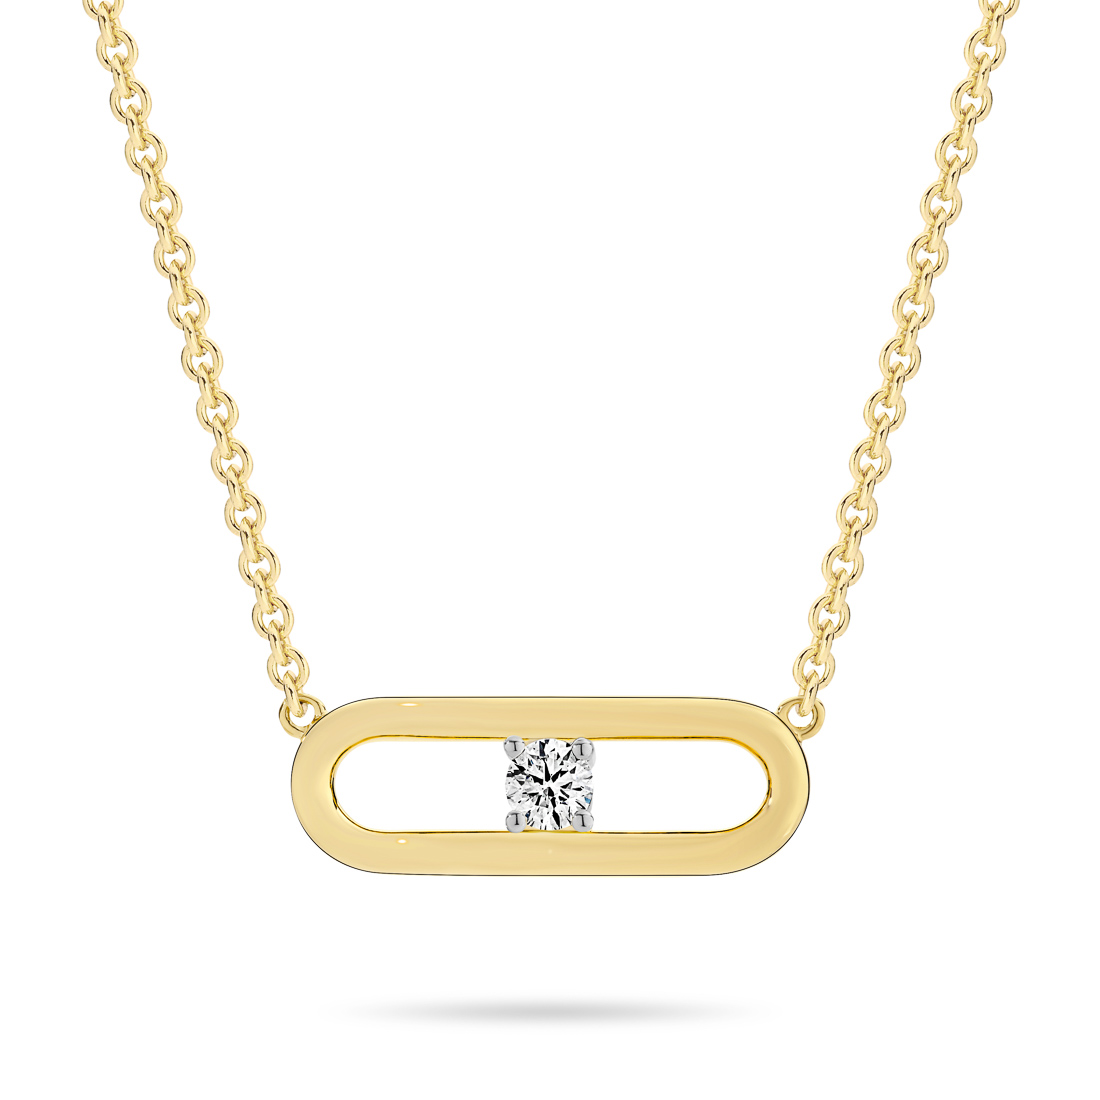 18K Yellow Gold Diamond Solitaire Link Necklace